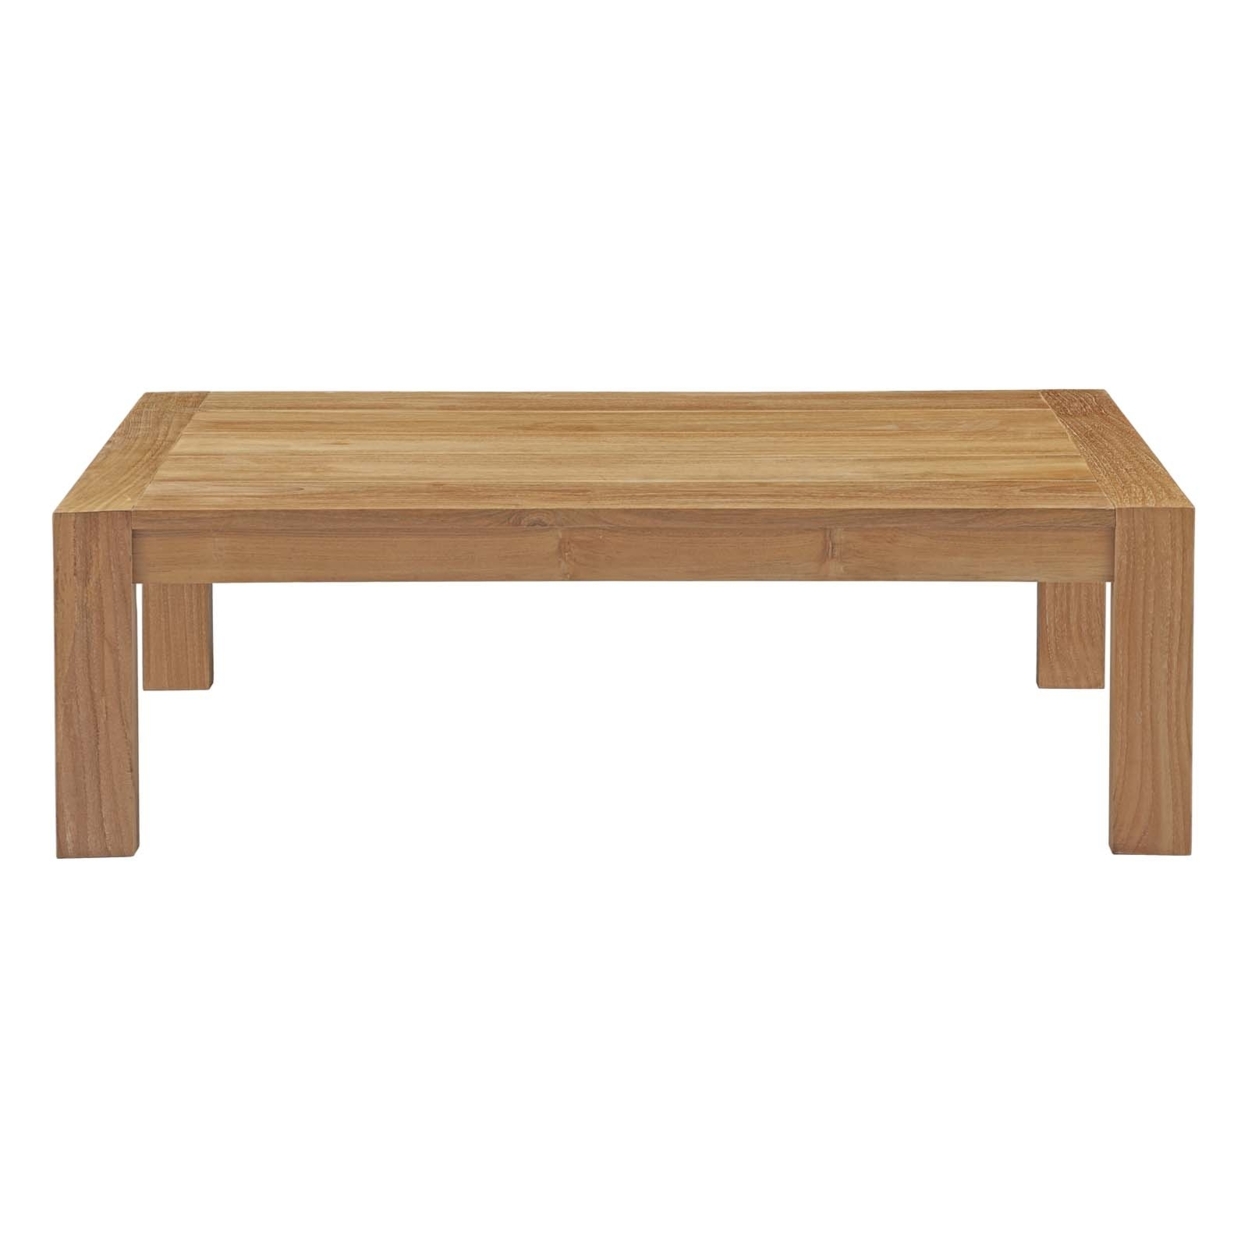 Modway Upland Outdoor Patio Wood Coffee Table in Natural - image 2 of 4